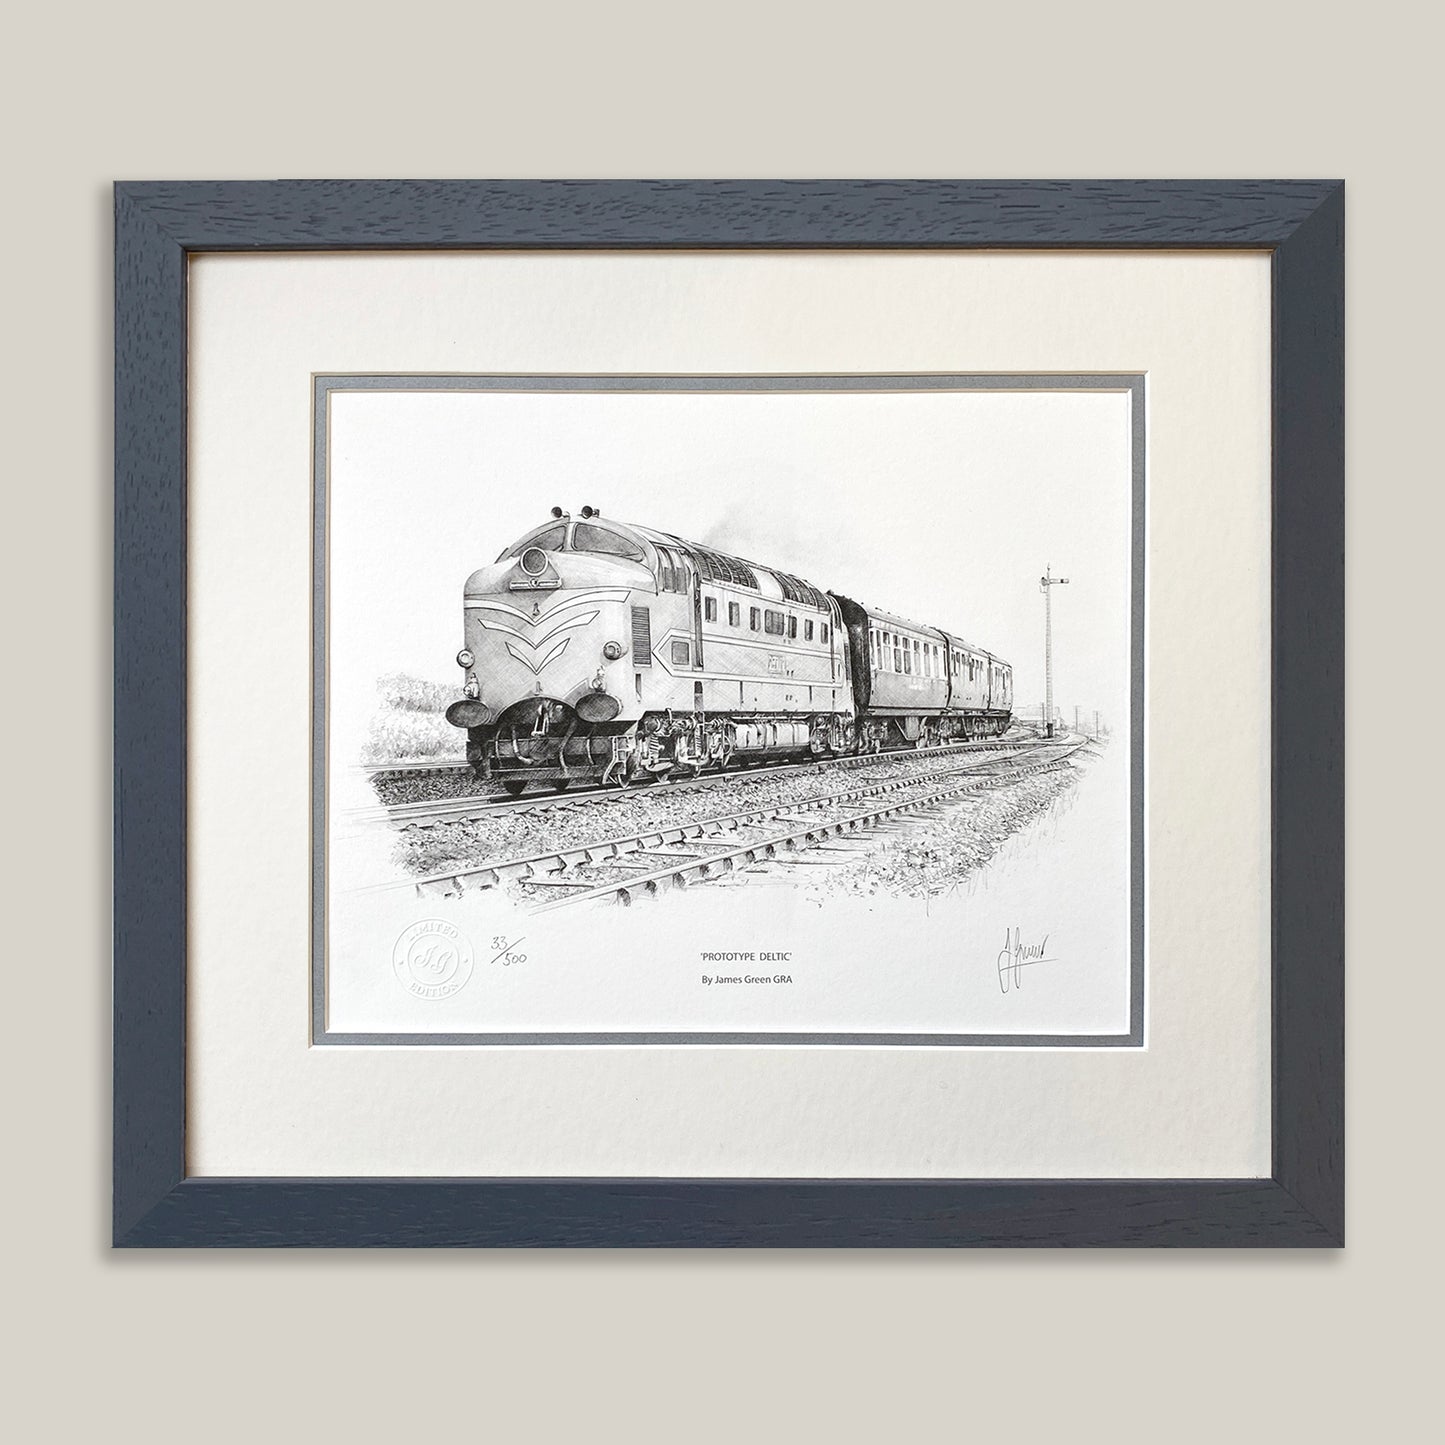 Prototype Deltic Limited Edition Print